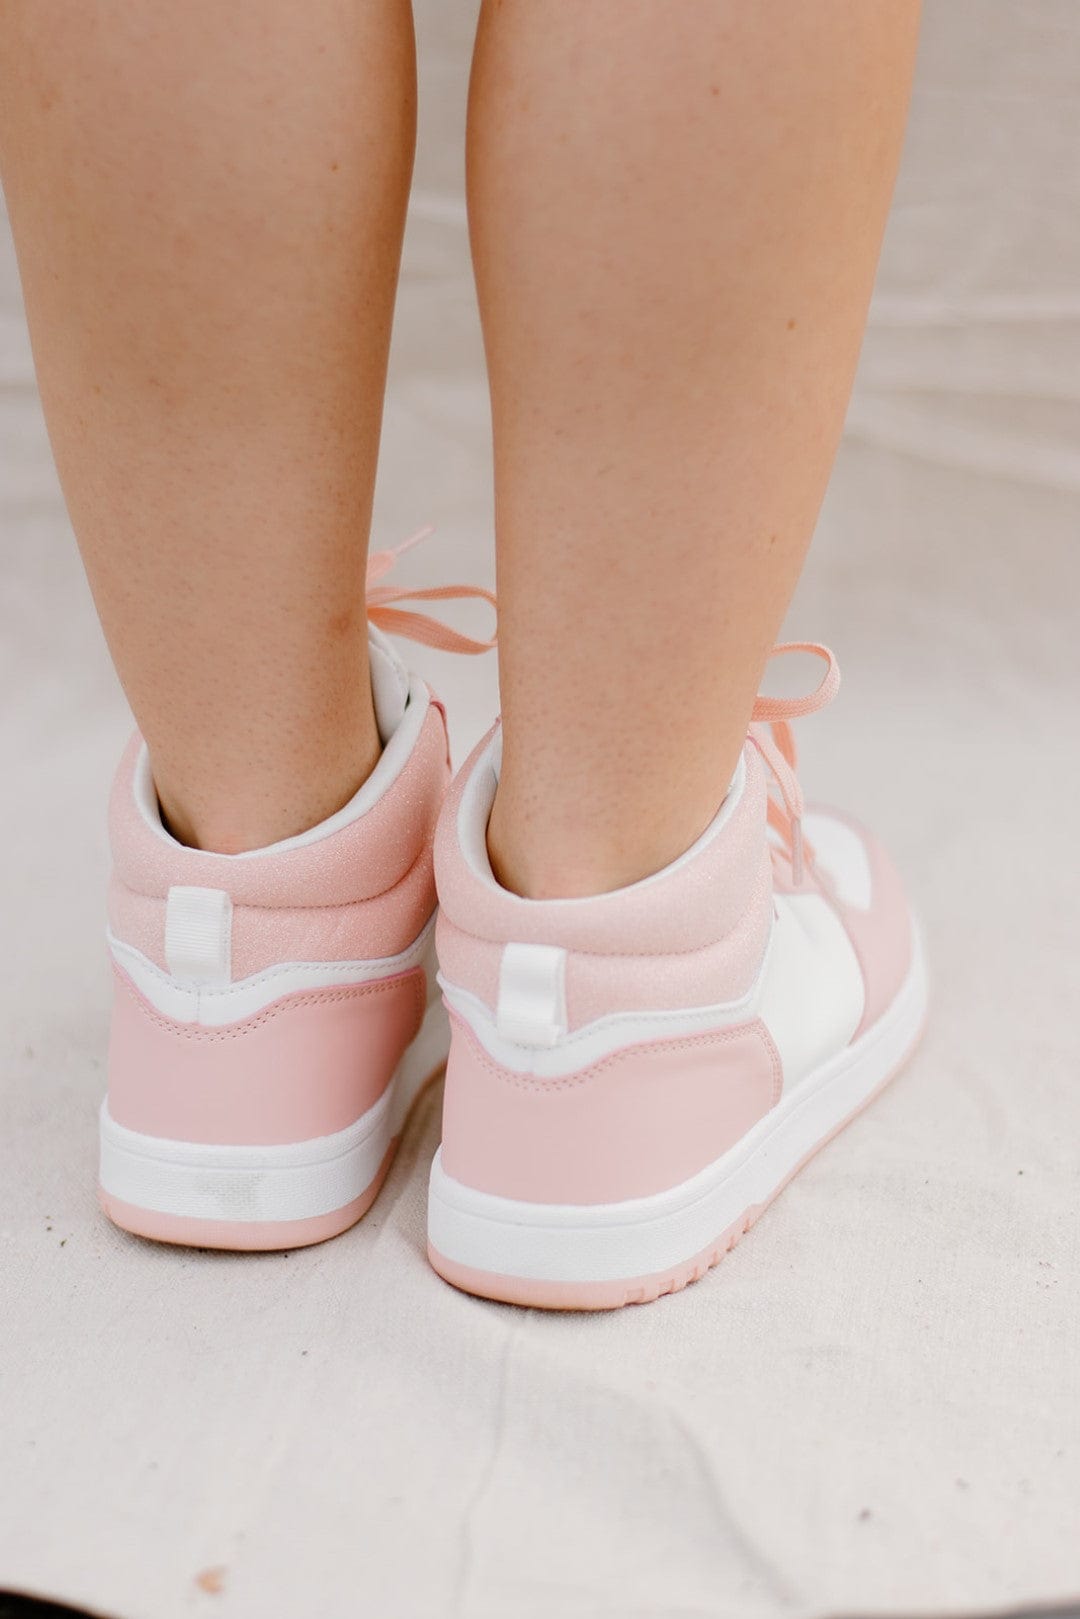 Pink & White High-Top Sneakers